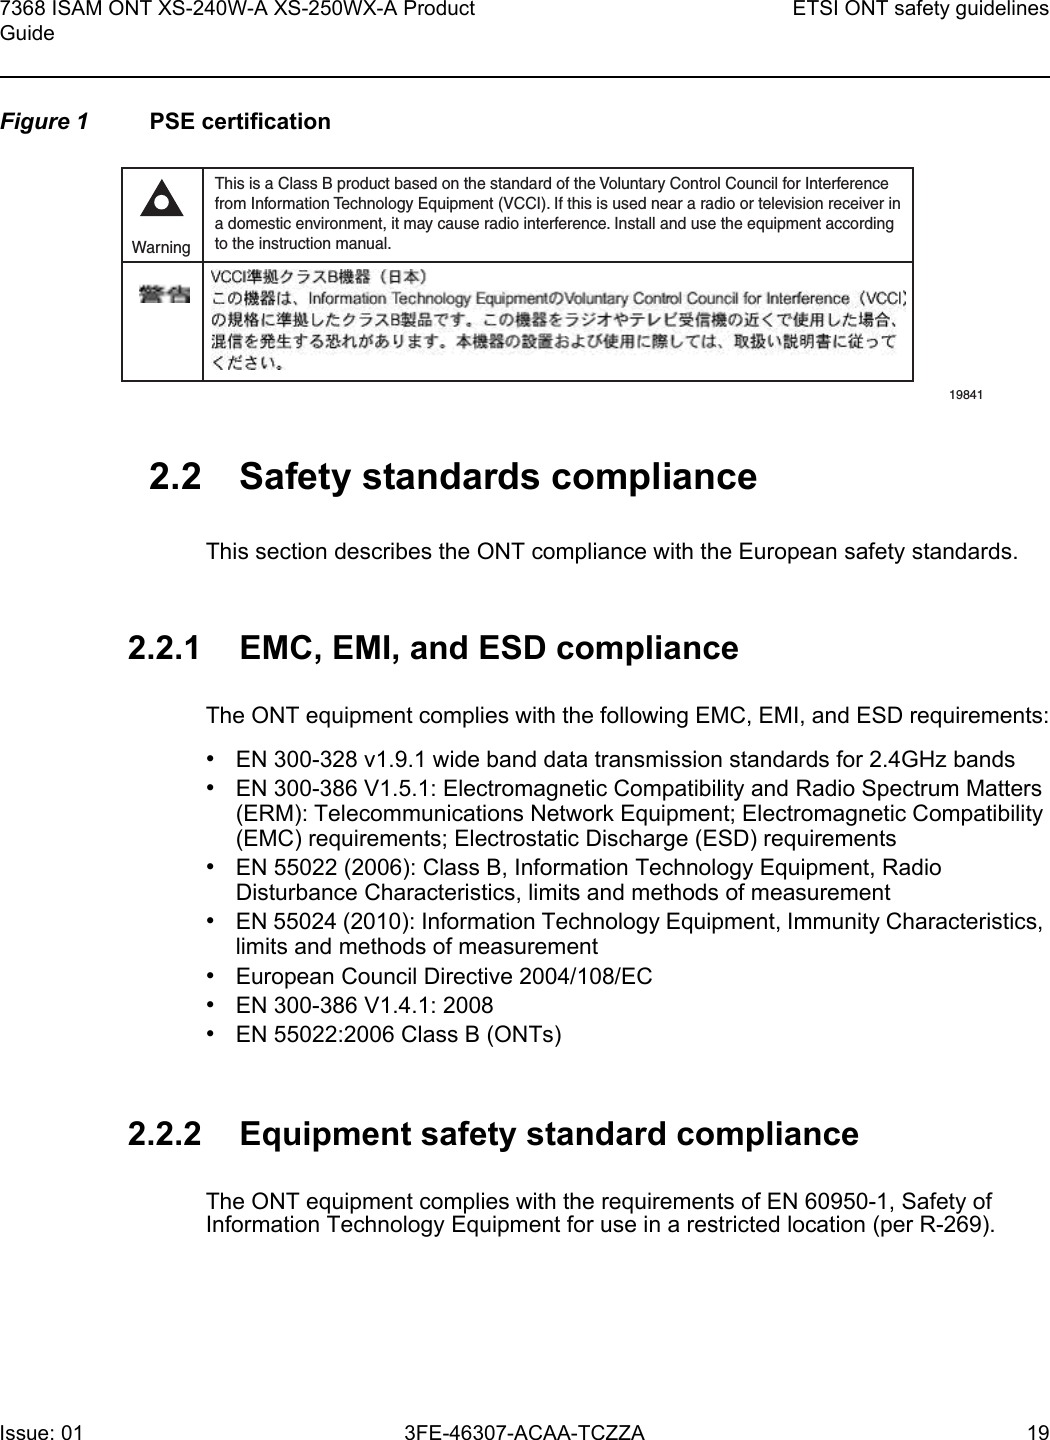 7368 ISAM ONT XS-240W-A XS-250WX-A Product GuideETSI ONT safety guidelinesIssue: 01 3FE-46307-ACAA-TCZZA 19 Figure 1 PSE certification2.2 Safety standards complianceThis section describes the ONT compliance with the European safety standards.2.2.1 EMC, EMI, and ESD complianceThe ONT equipment complies with the following EMC, EMI, and ESD requirements:•EN 300-328 v1.9.1 wide band data transmission standards for 2.4GHz bands•EN 300-386 V1.5.1: Electromagnetic Compatibility and Radio Spectrum Matters (ERM): Telecommunications Network Equipment; Electromagnetic Compatibility (EMC) requirements; Electrostatic Discharge (ESD) requirements•EN 55022 (2006): Class B, Information Technology Equipment, Radio Disturbance Characteristics, limits and methods of measurement•EN 55024 (2010): Information Technology Equipment, Immunity Characteristics, limits and methods of measurement•European Council Directive 2004/108/EC•EN 300-386 V1.4.1: 2008•EN 55022:2006 Class B (ONTs)2.2.2 Equipment safety standard complianceThe ONT equipment complies with the requirements of EN 60950-1, Safety of Information Technology Equipment for use in a restricted location (per R-269).This is a Class B product based on the standard of the Voluntary Control Council for Interferencefrom Information Technology Equipment (VCCI). If this is used near a radio or television receiver ina domestic environment, it may cause radio interference. Install and use the equipment accordingto the instruction manual. Warning19841